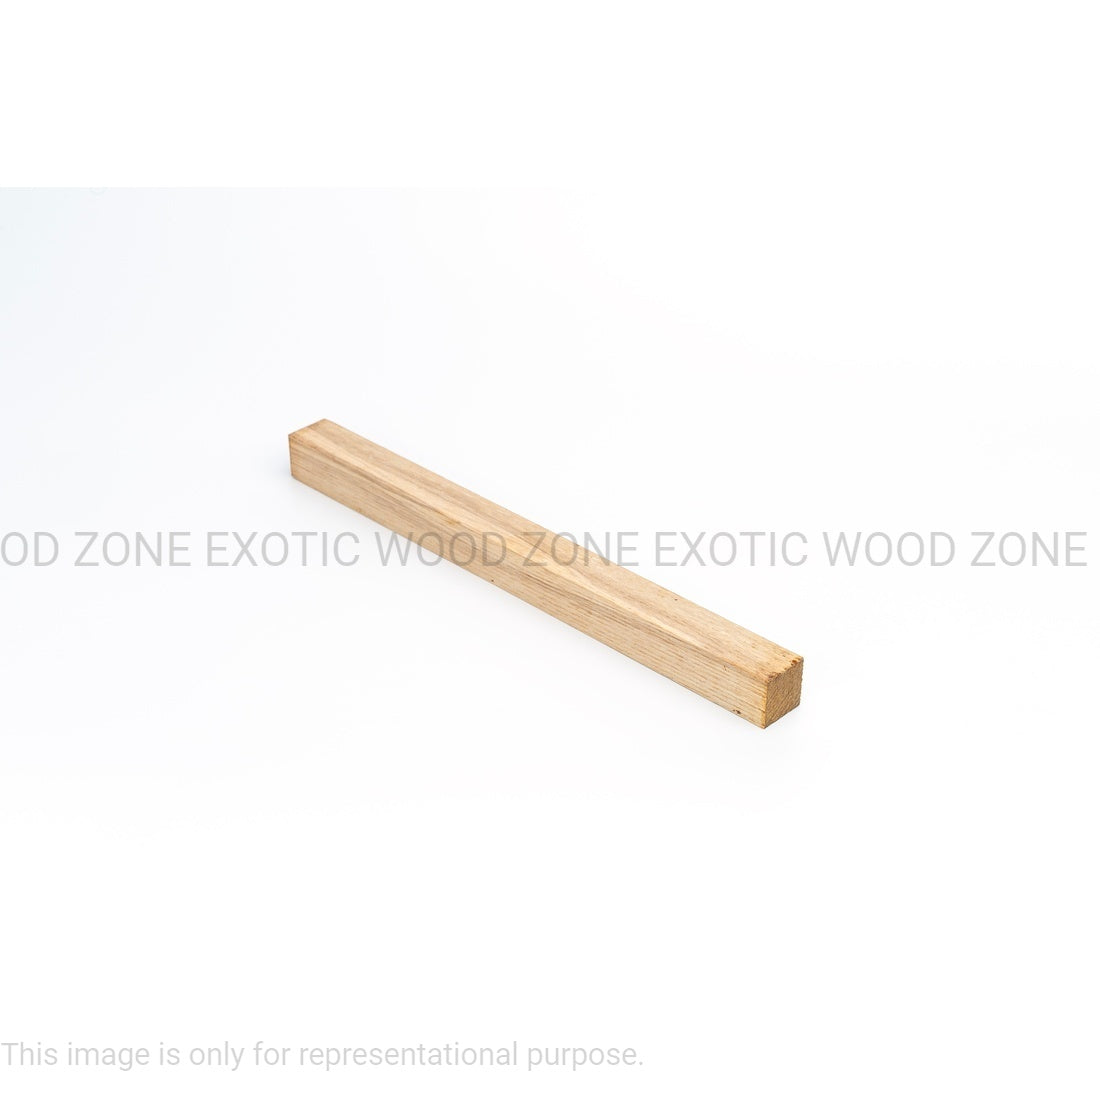 White Ash Hobbywood Blank 1&quot; x 1 &quot; x 12&quot; inches Exotic Wood Zone